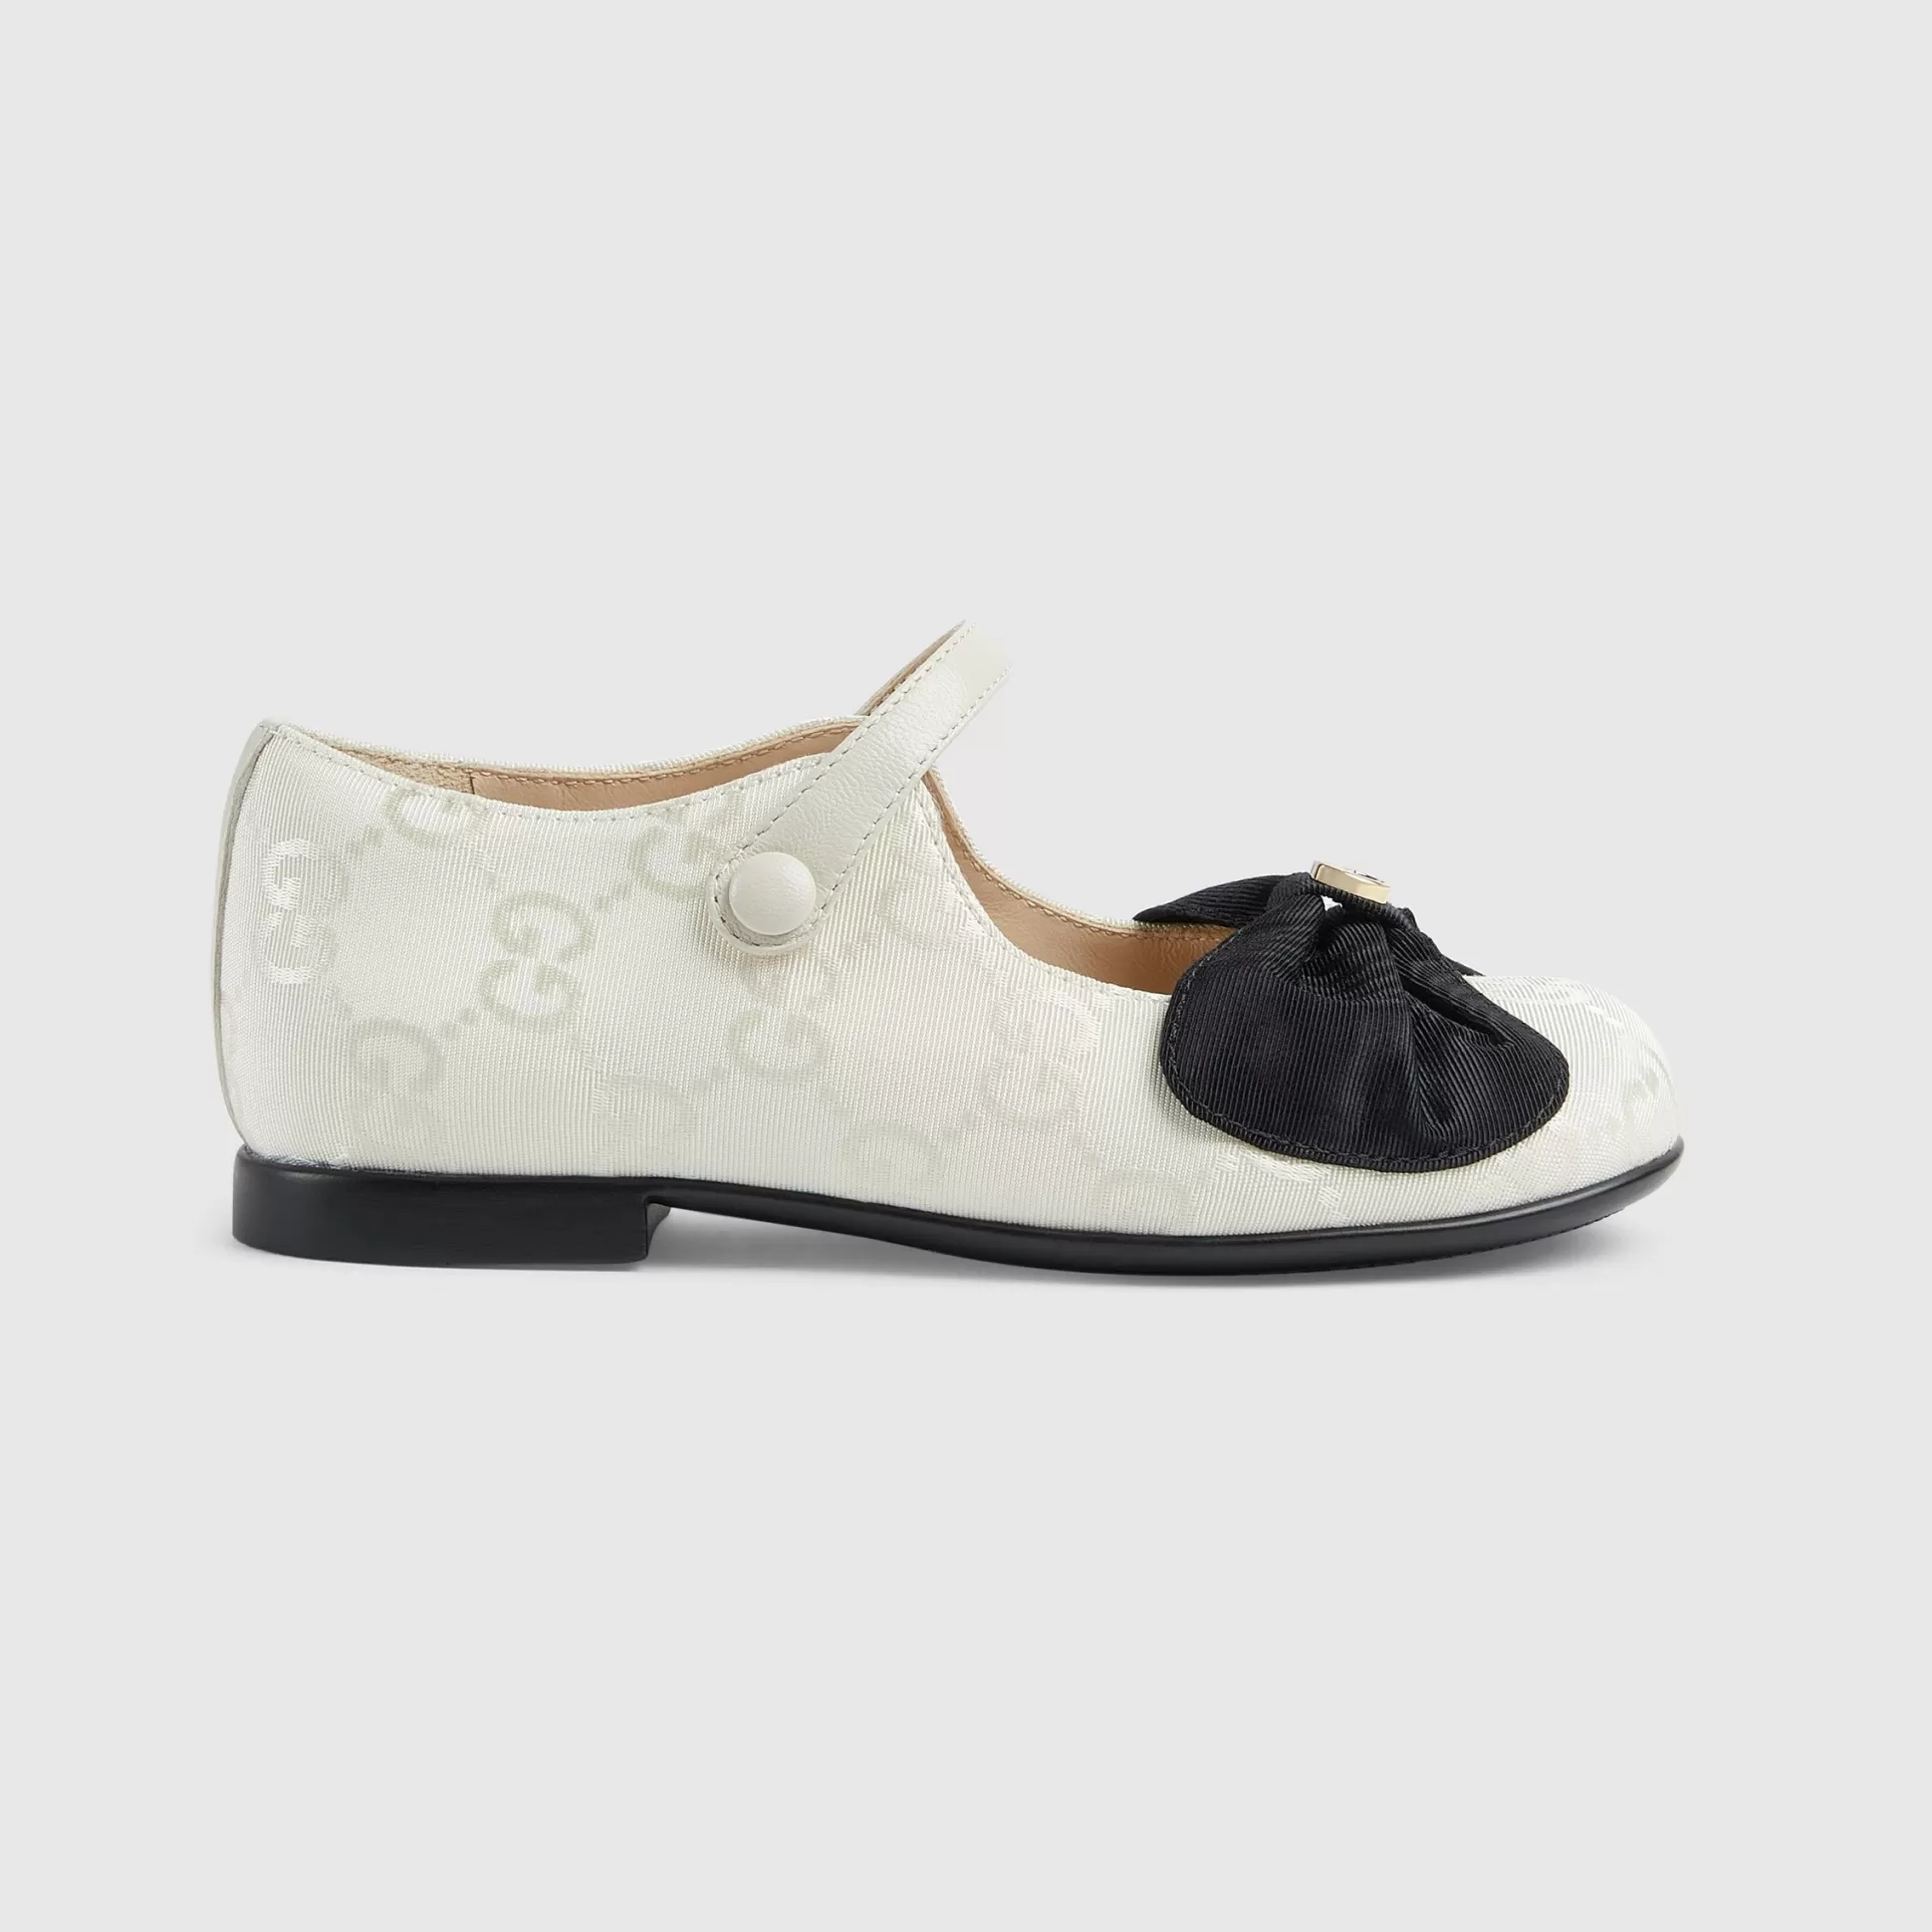 GUCCI Children'S Ballerina Flat With Bow-Children Shoes